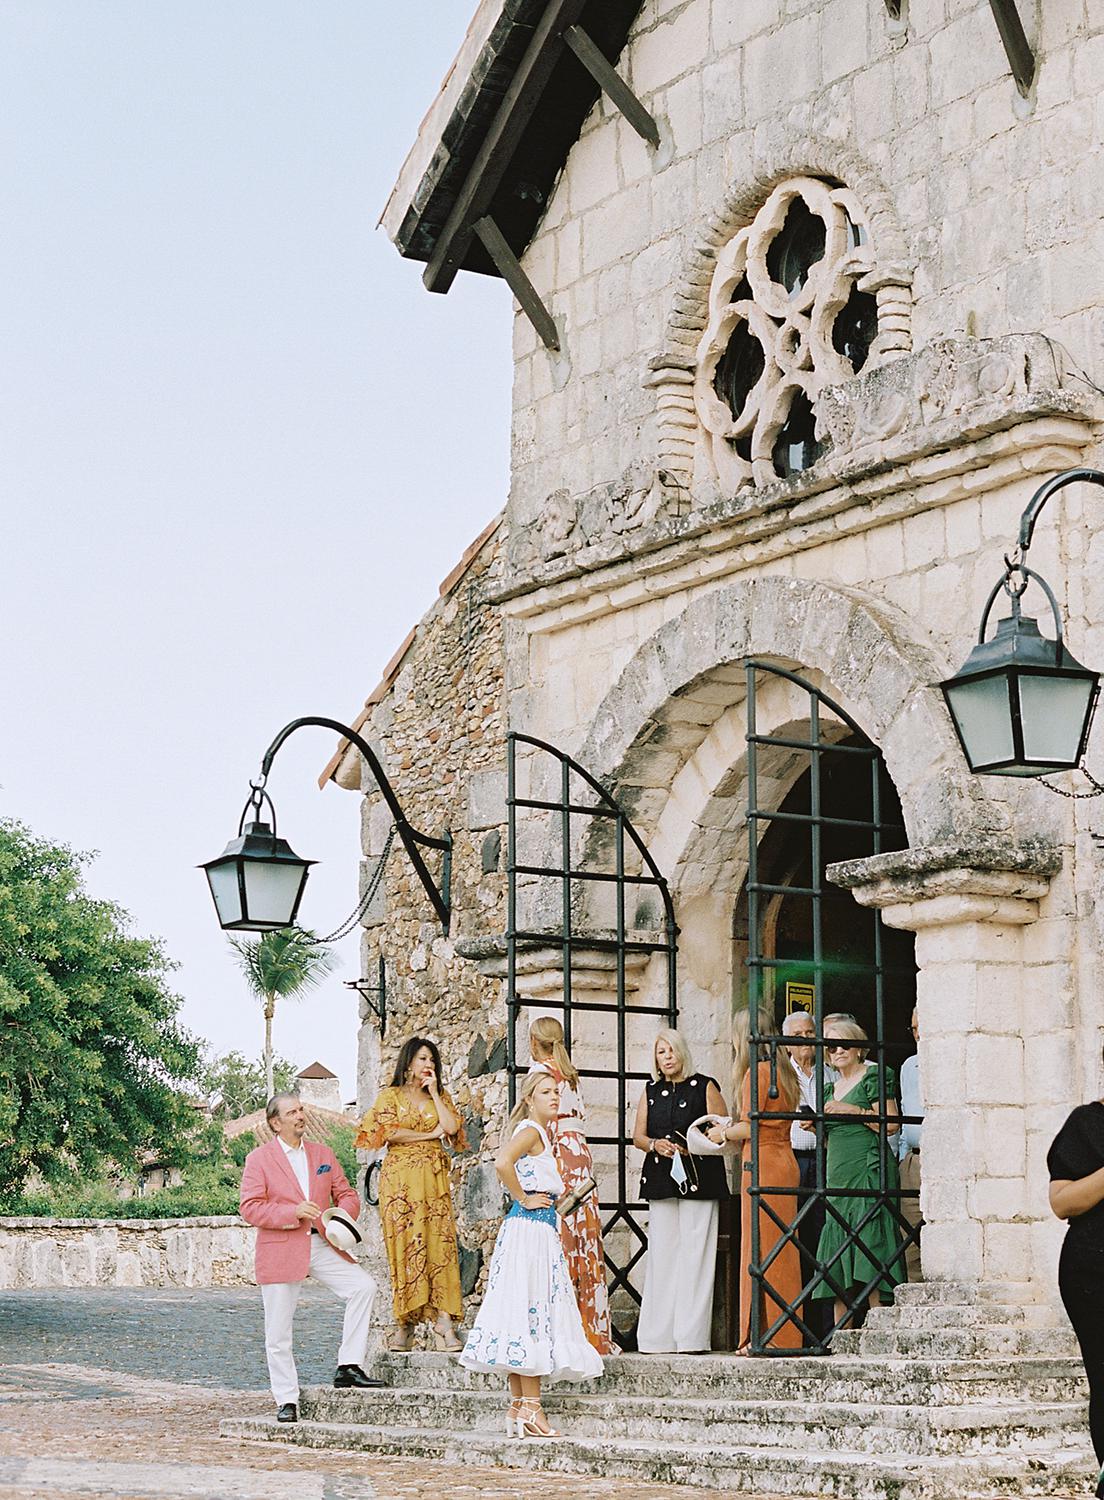 Guests waiting for wedding ceremony to begin at the church in Altos De Chavon